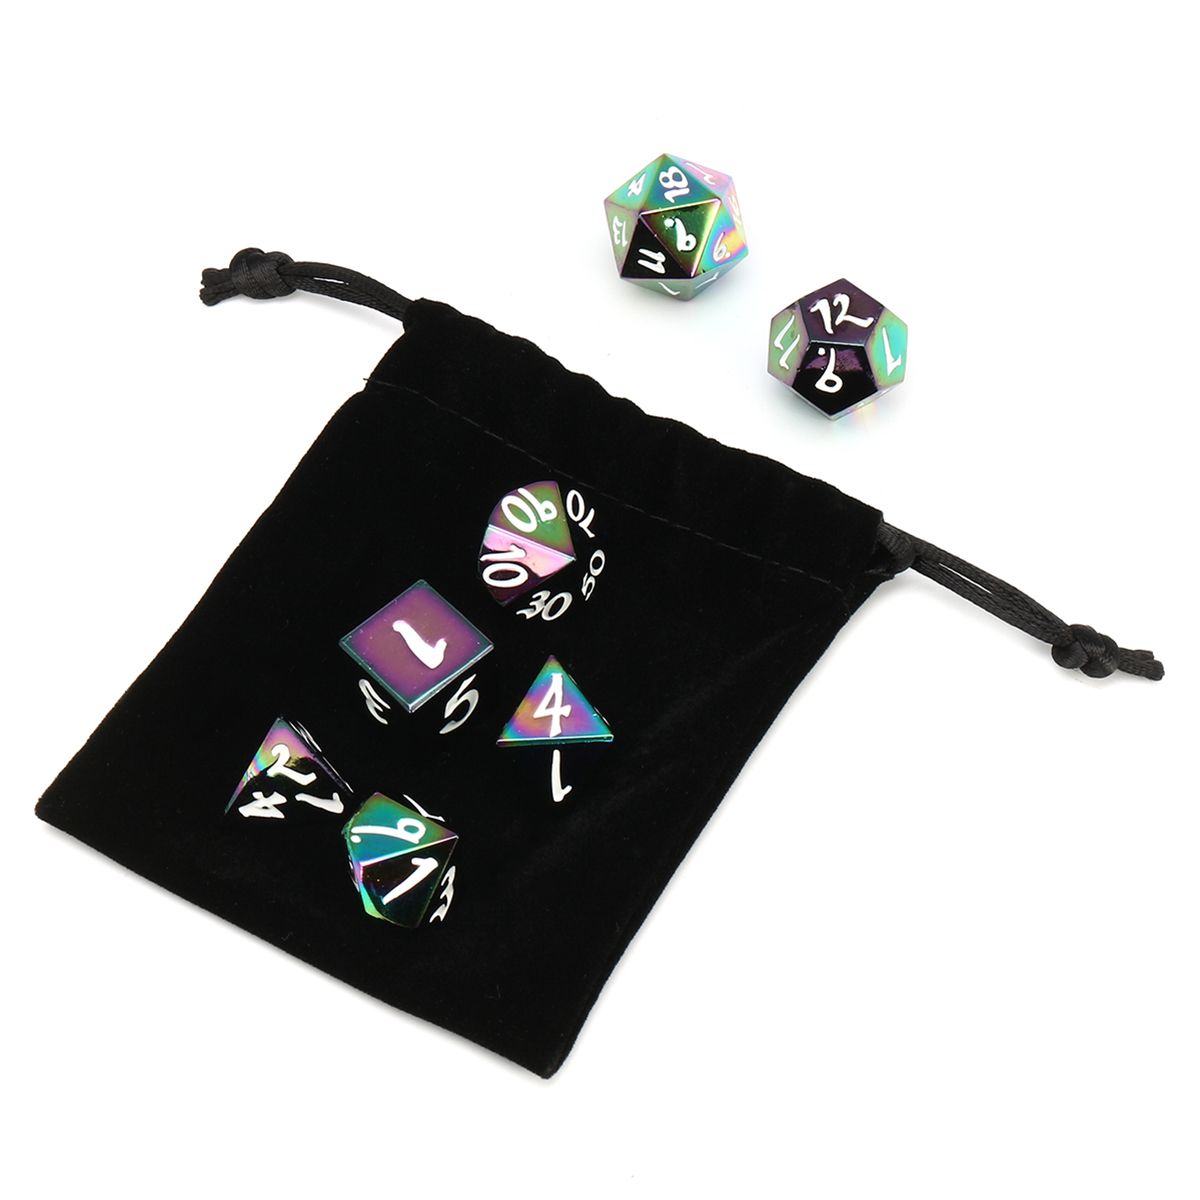 7Pcs-Antique-Metal-Polyhedral-Dices-Set-Role-Playing-Game-Gadget-With-Bag-1287723